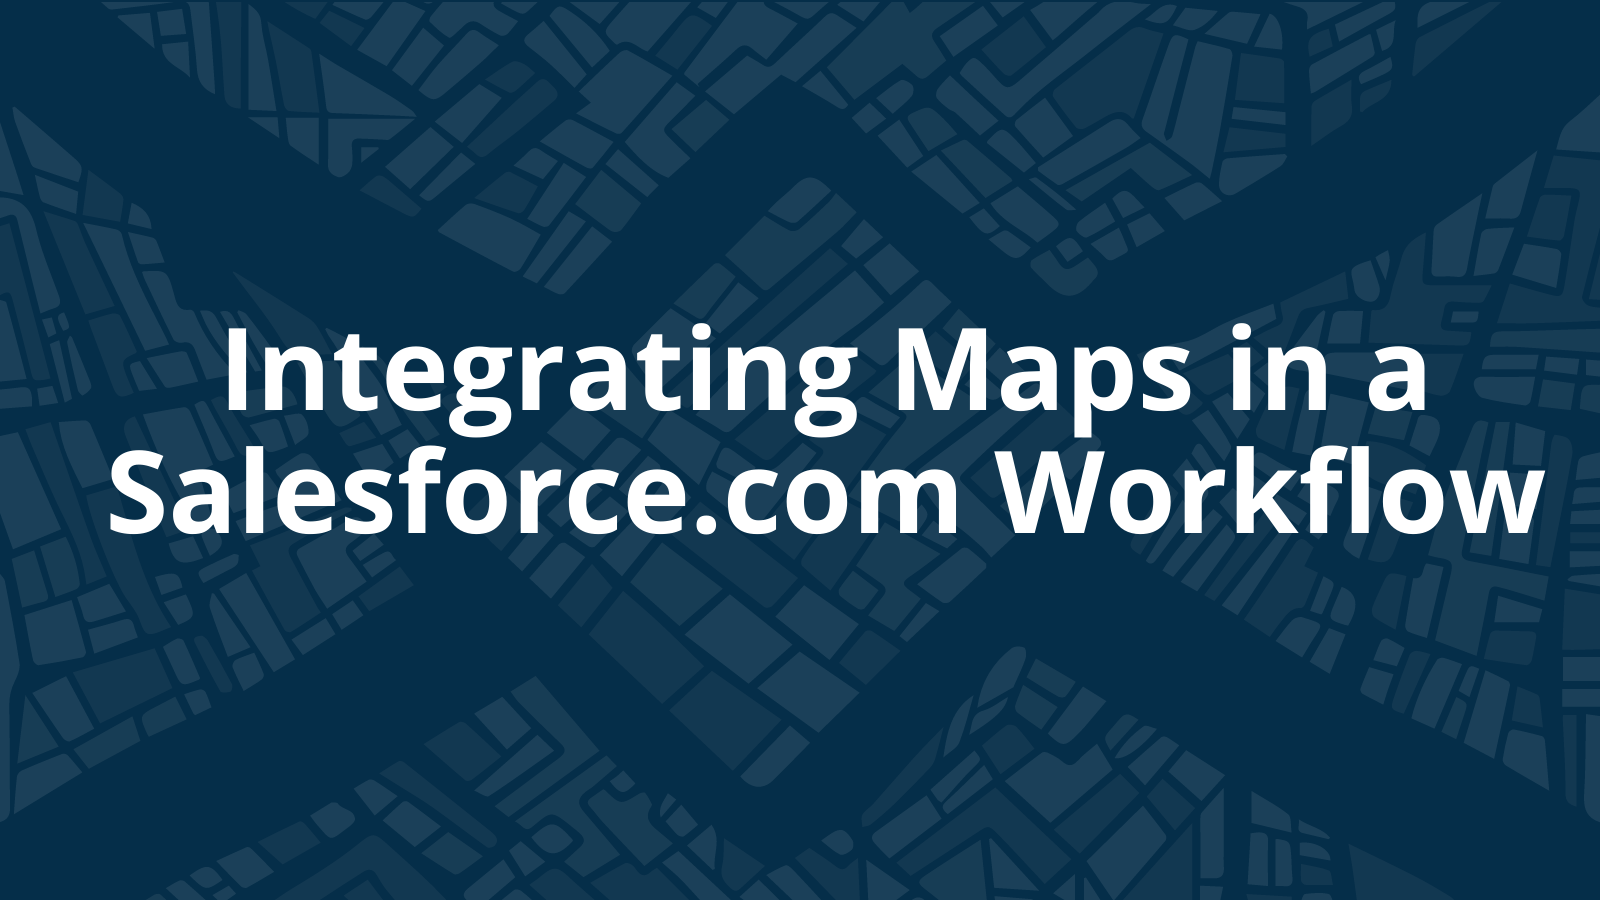 Integrating Maps in a Salesforce.com Workflow